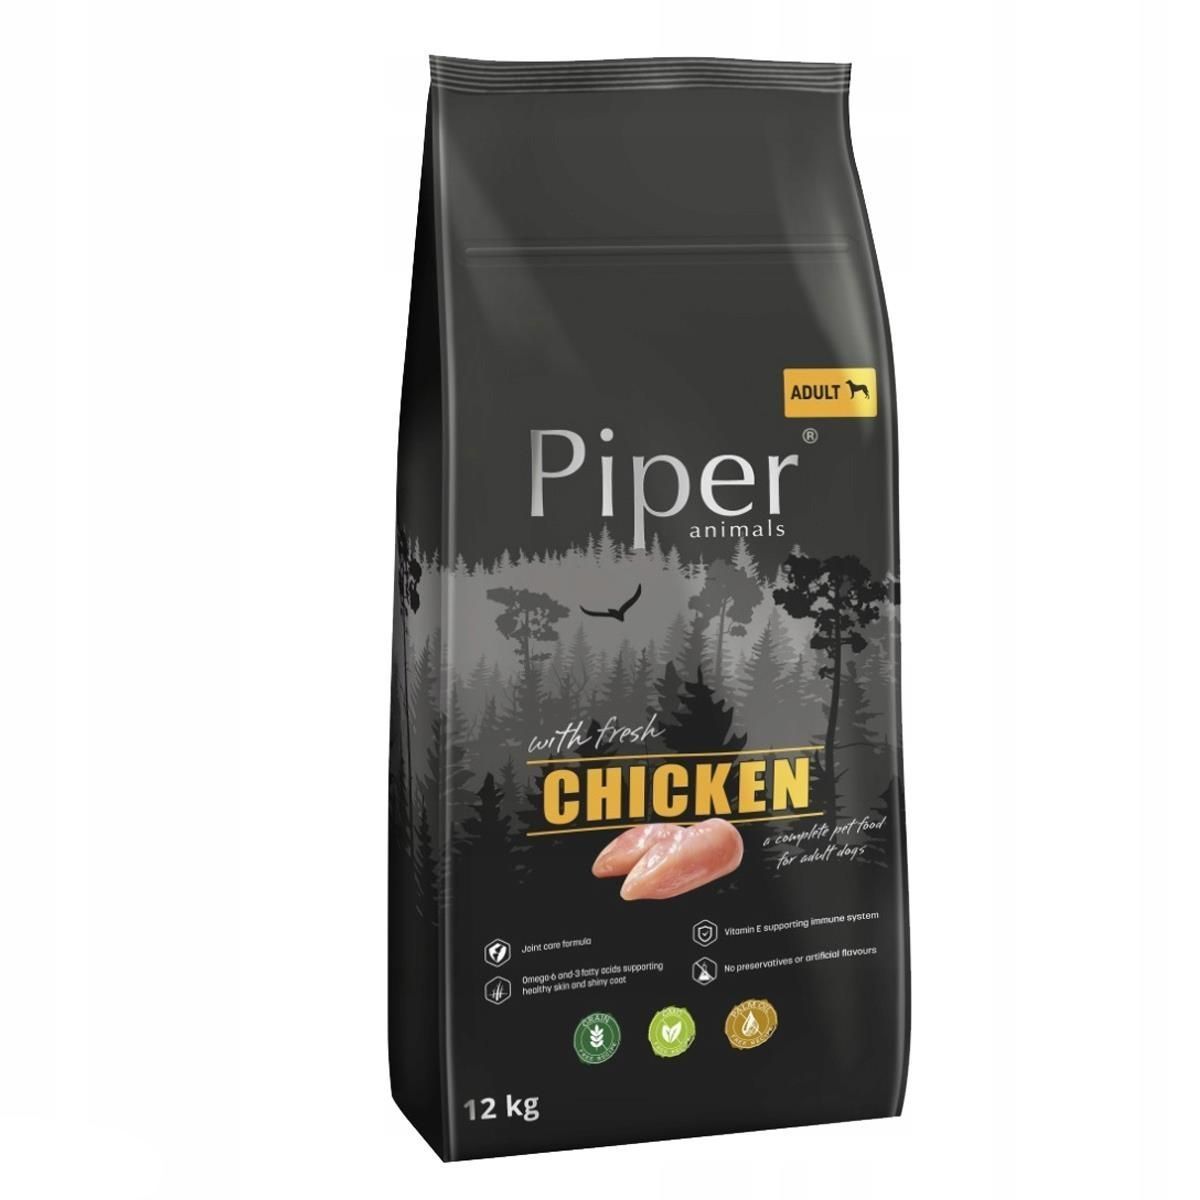 Piper Adult Dog, Pui, 12 Kg Adult